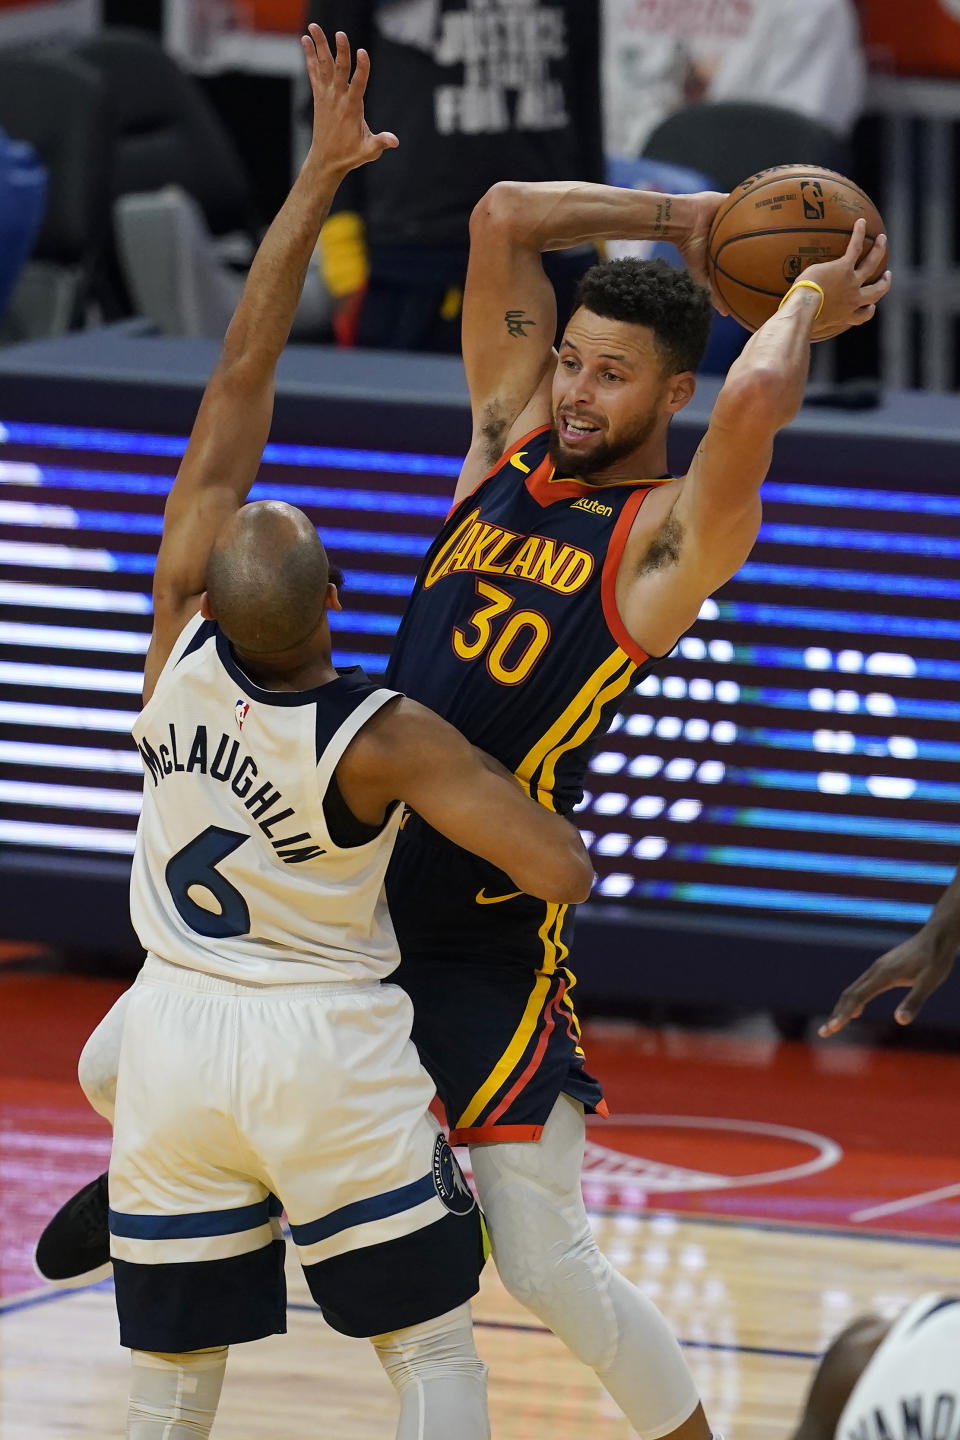 Golden State Warriors guard Stephen Curry (30) looks to pass the ball while defended by Minnesota Timberwolves guard Jordan McLaughlin (6) during the first half of an NBA basketball game in San Francisco, Wednesday, Jan. 27, 2021. (AP Photo/Jeff Chiu)